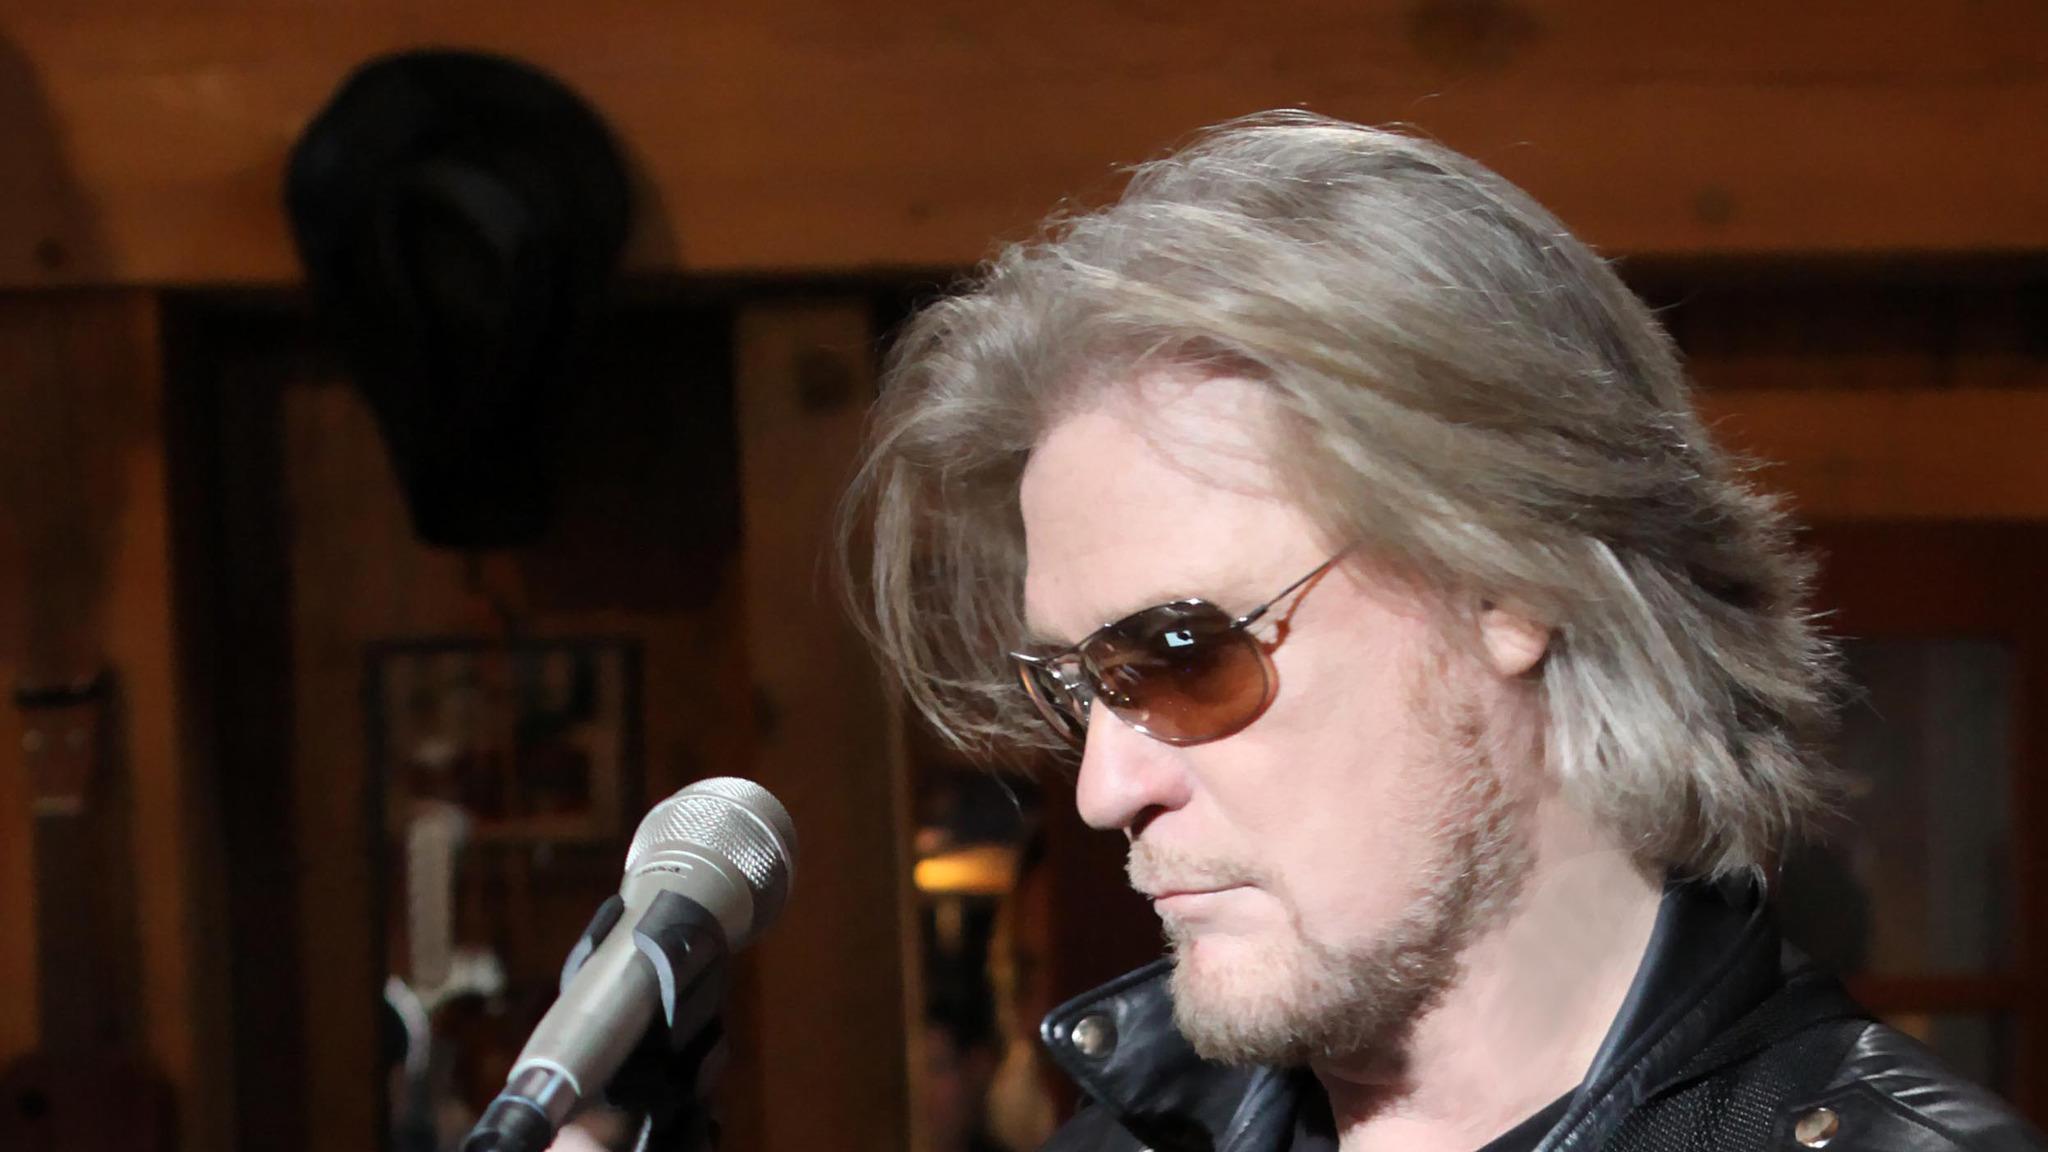 Daryl Hall and the Daryl's House Band with Special Guest Todd Rundgren presale code for early tickets in Hollywood